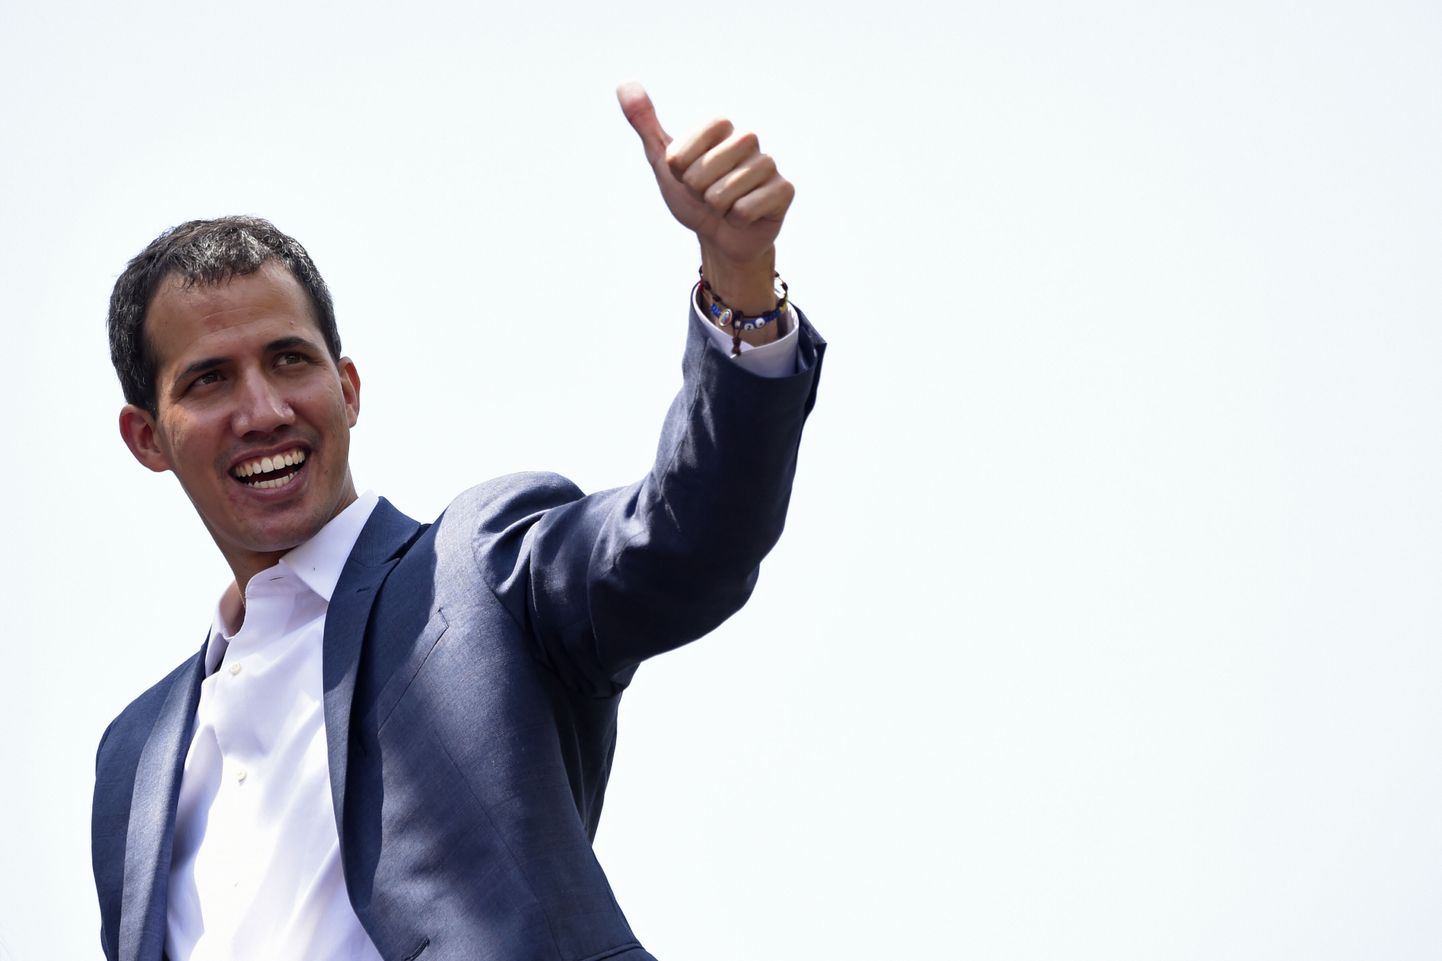 TOPSHOT - Opposition leader Juan Guaido gives his thumb up to thousands of supporters, in Caracas on February 2, 2019. - Tens of thousands of protesters were set to pour onto the streets of Caracas to back self-proclaimed acting president Guaido's calls for early elections as international pressure increased on President Nicolas Maduro to step down. Major European countries have set a Sunday deadline for Maduro to call snap presidential elections. (Photo by Juan BARRETO / AFP)